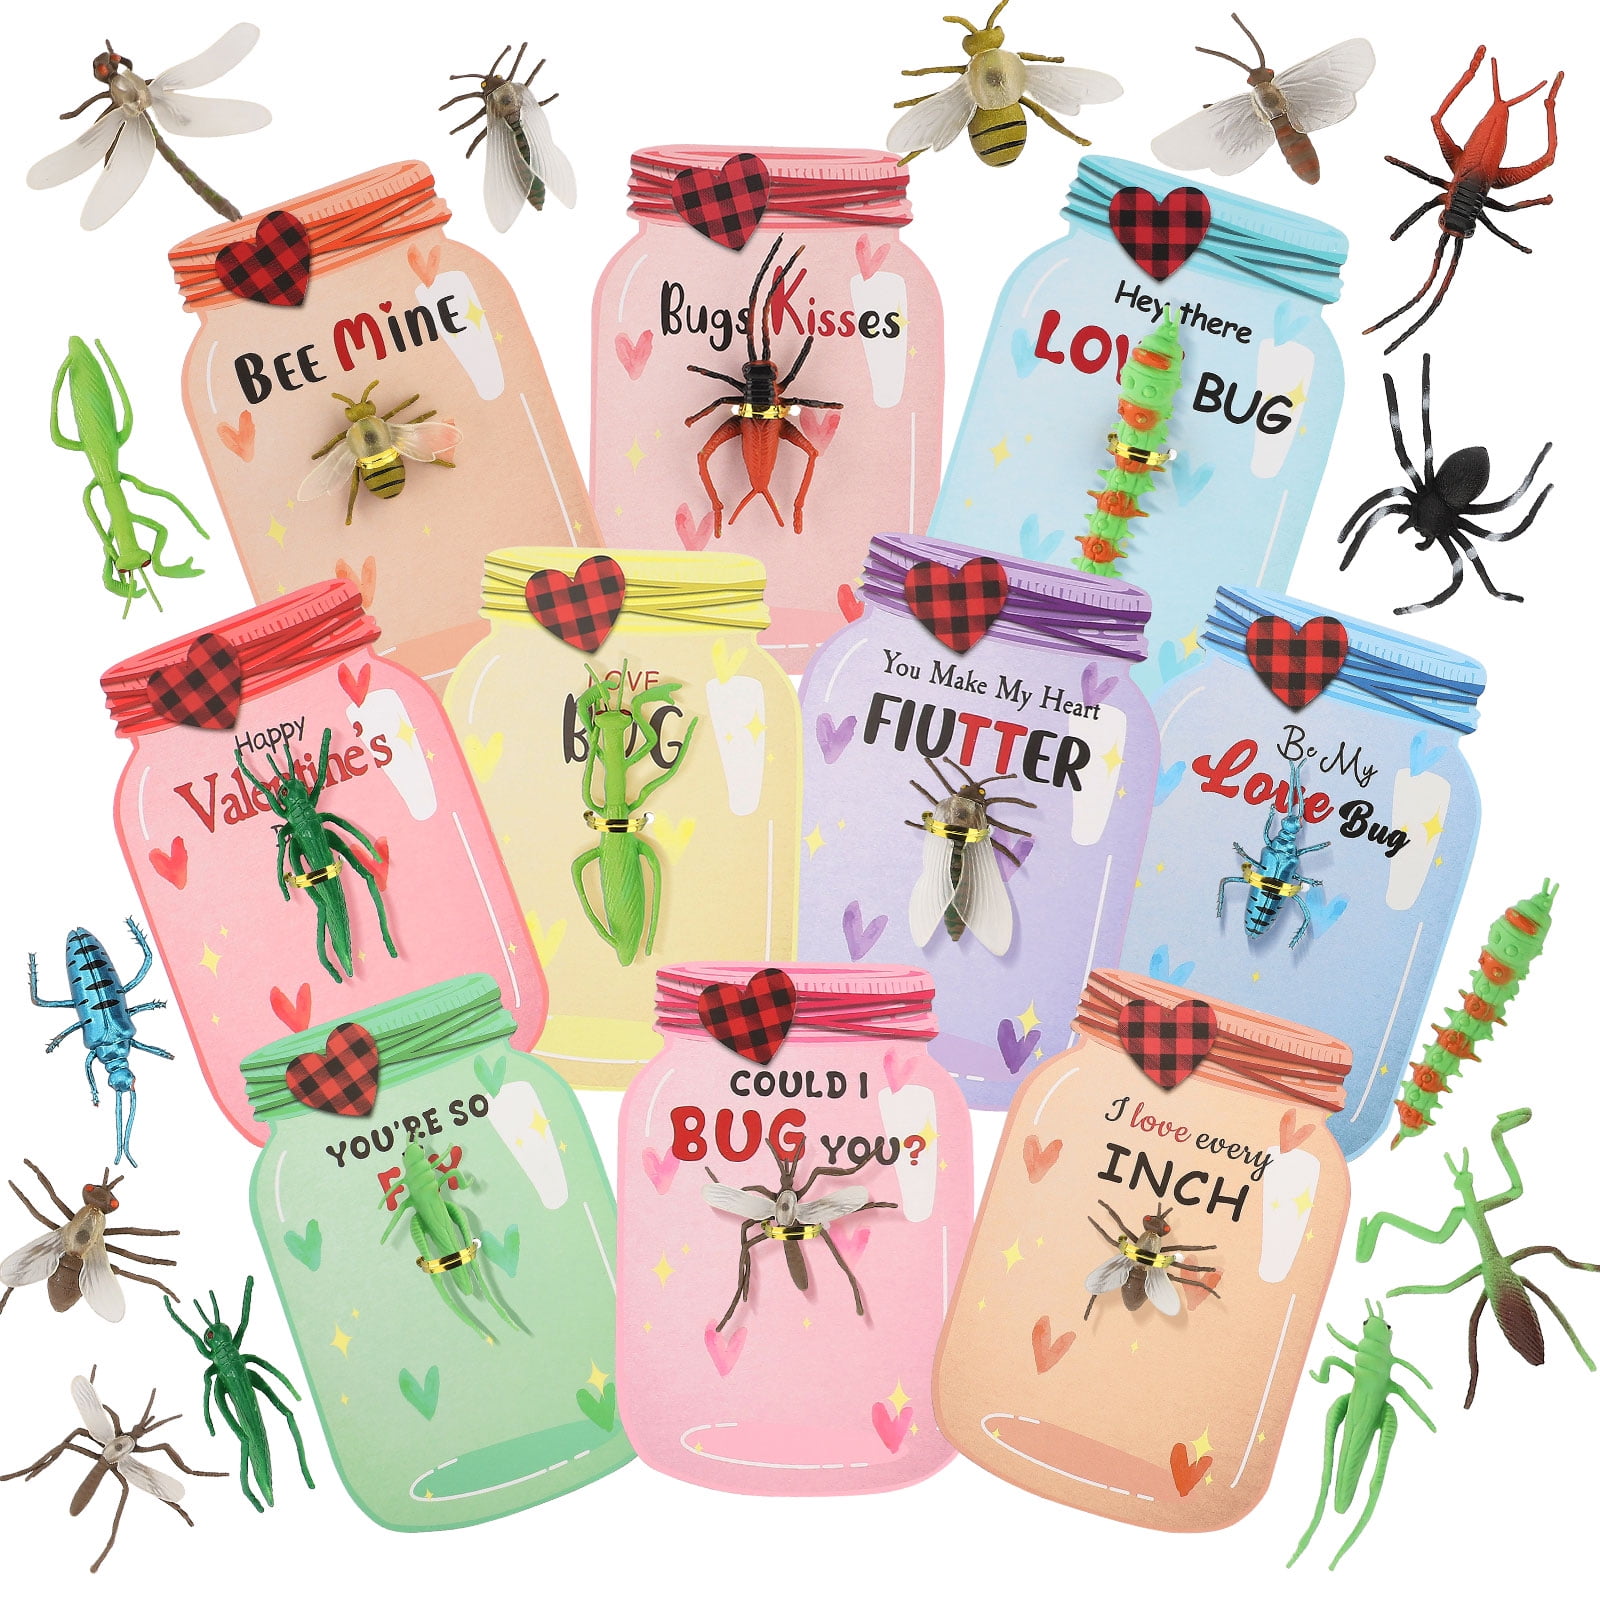  Valentines Day Gifts for Kids - 30 Pack Love Bug Card Bulk 6  Different Bugs Toy - Funny Greeting Valentine Exchange Cards for Boys Girls  School Class Classroom Party Favors : Toys & Games